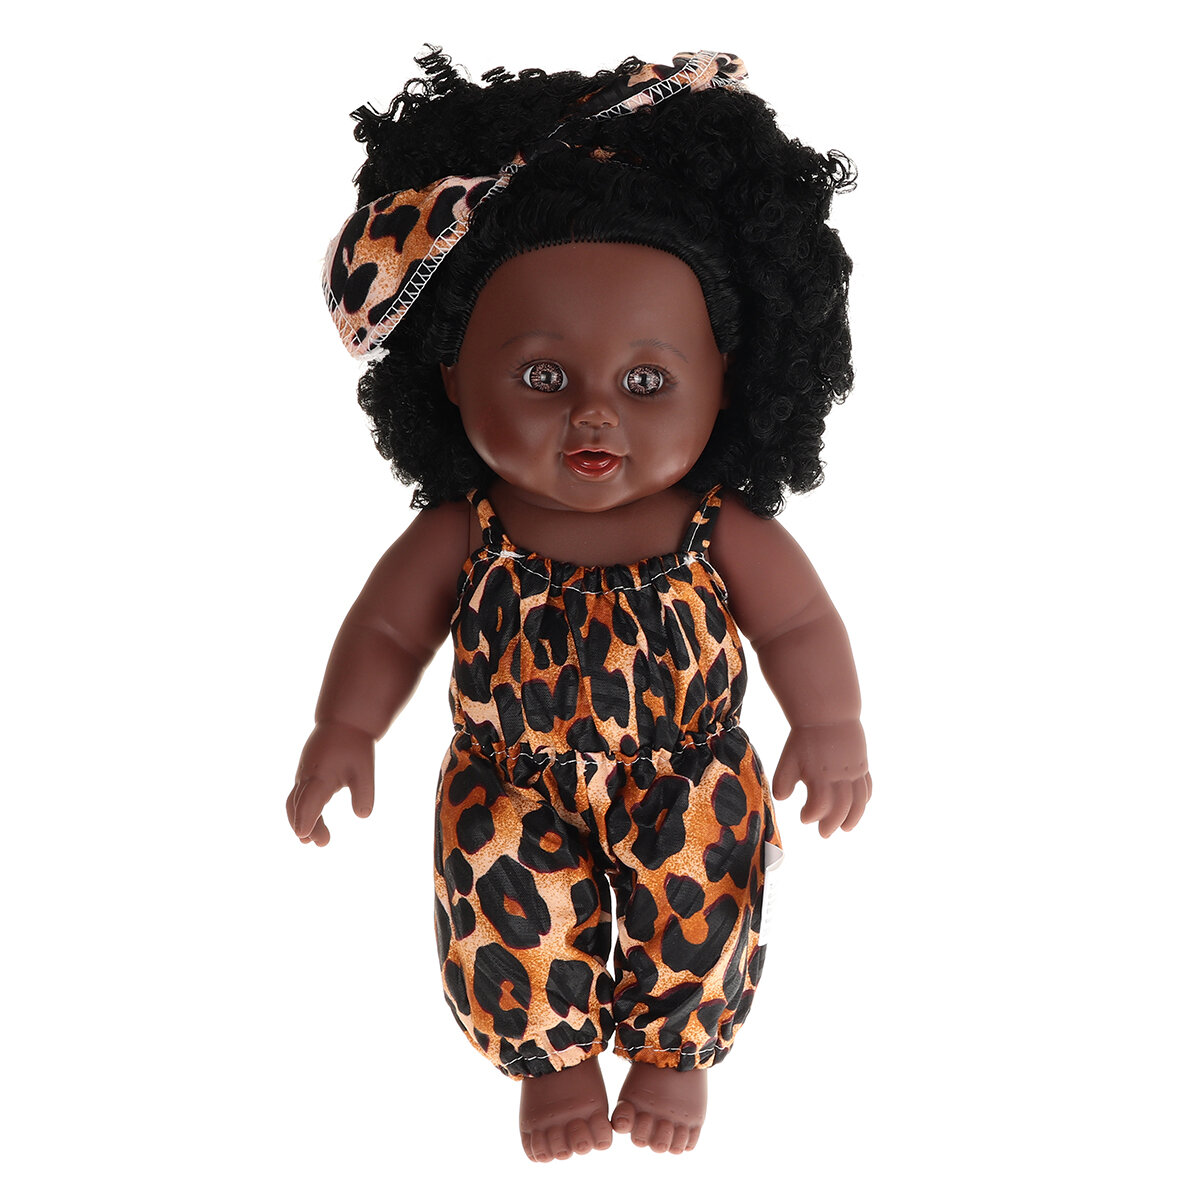 12Inch Simulation Soft Silicone Vinyl PVC Black Baby Fashion Doll Rotate 360° African Girl Perfect Reborn Doll Toy for B